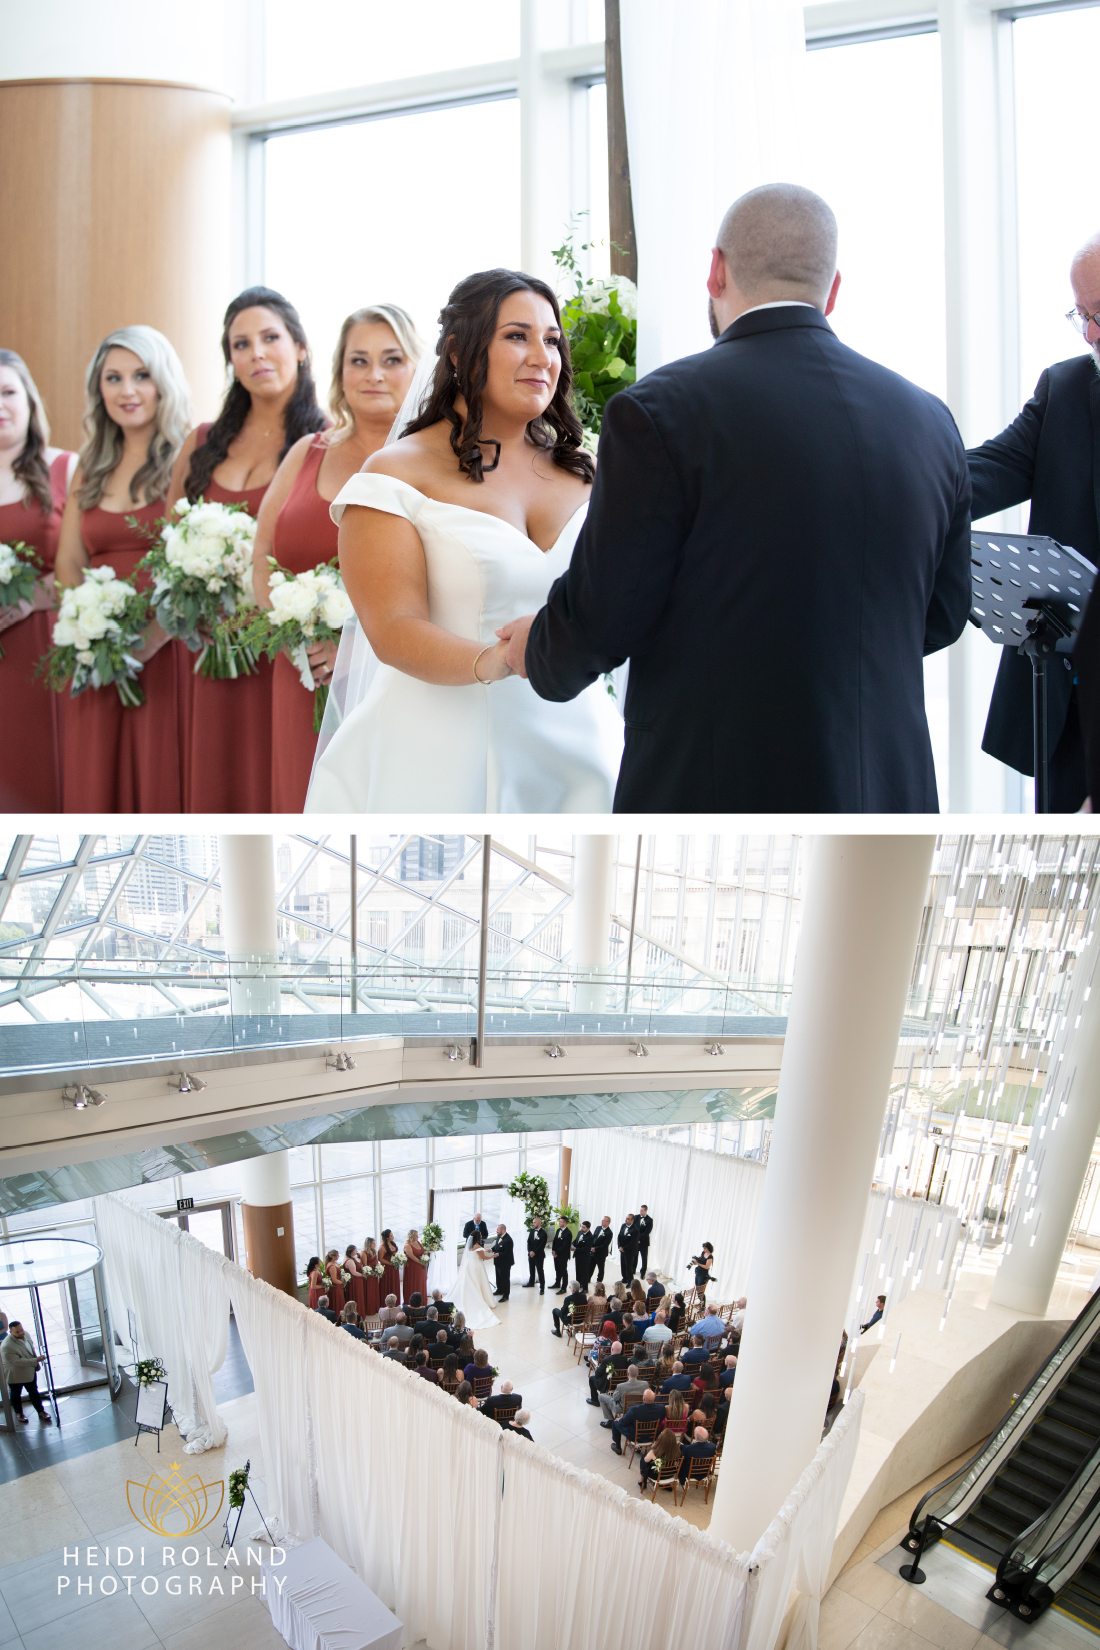 Bride and groom exchanging vows at the cira centra atrium in philadelphia